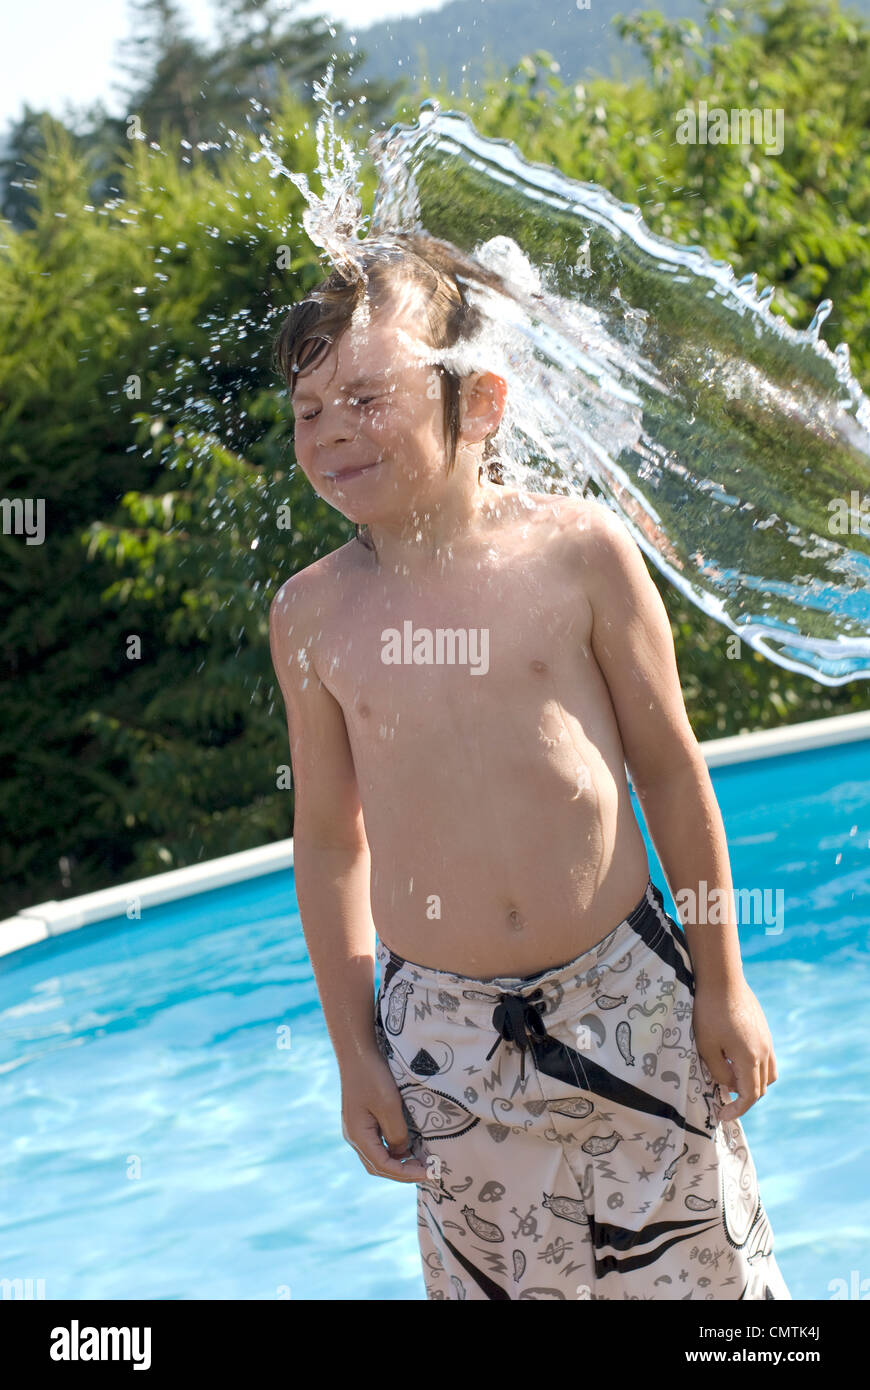 Young boy being splashed with water, Victoria, British Columbia Stock Photo